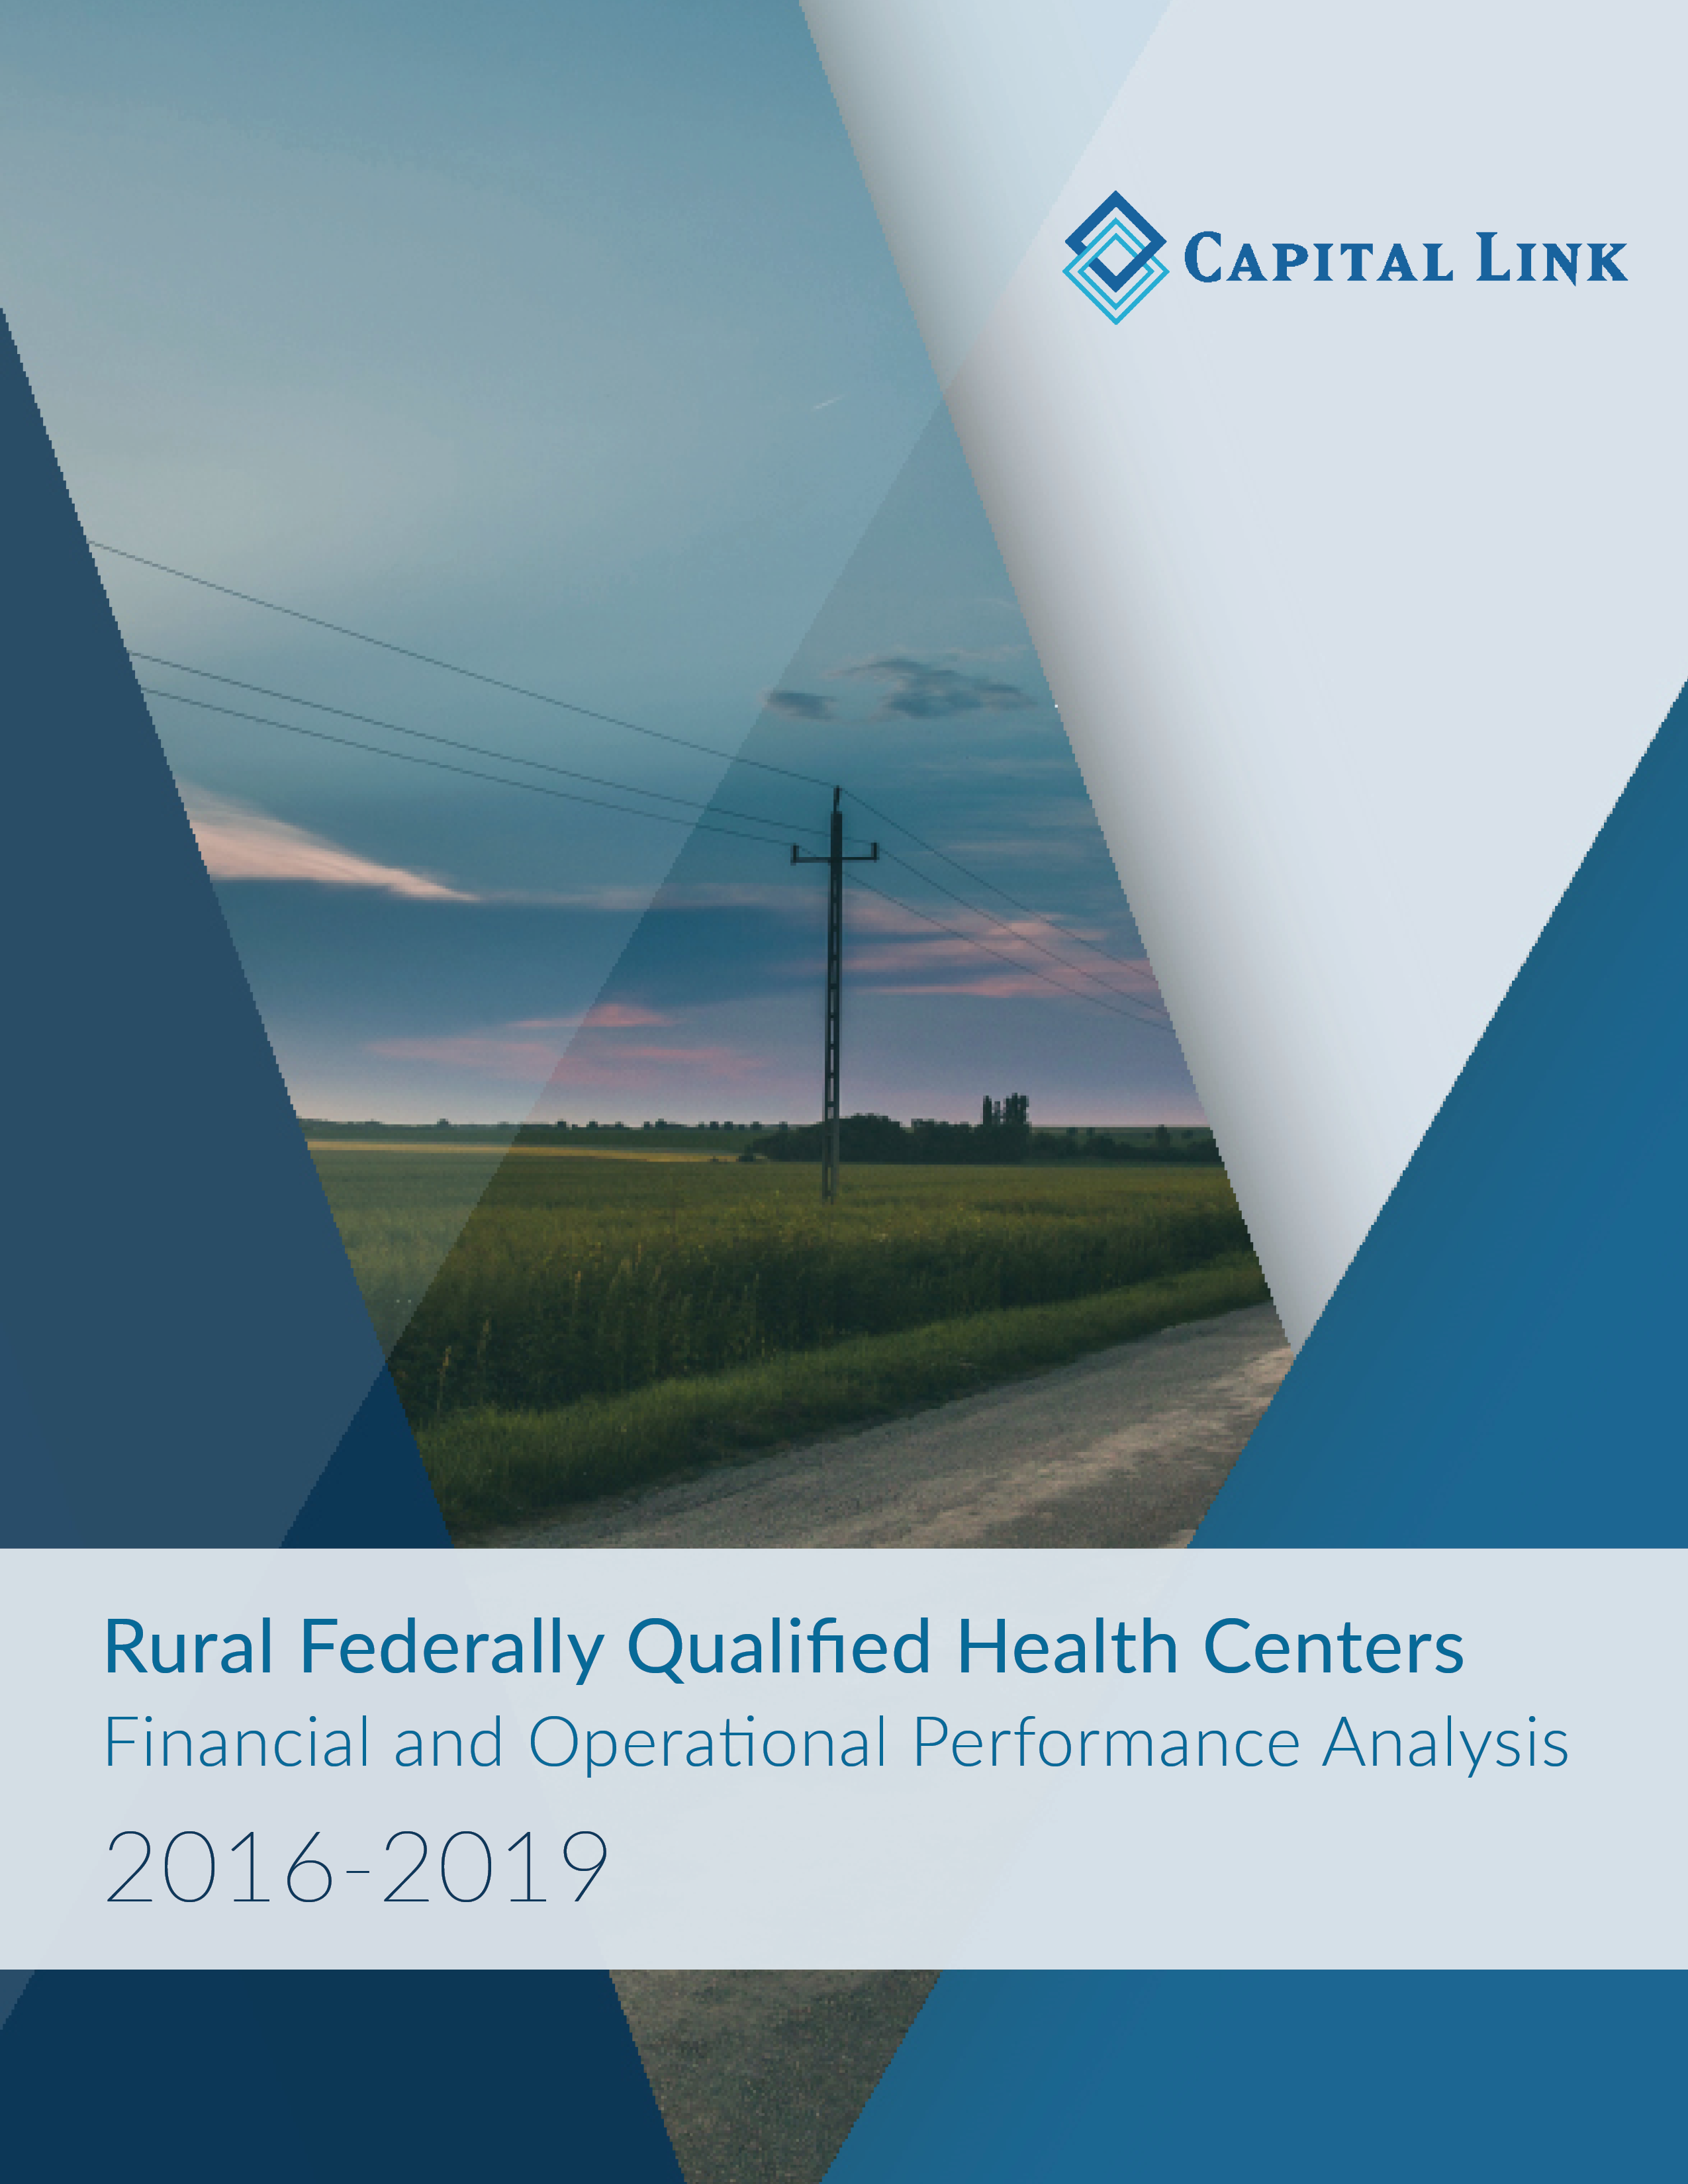 Rural Financial and Operational Trends Report 2020